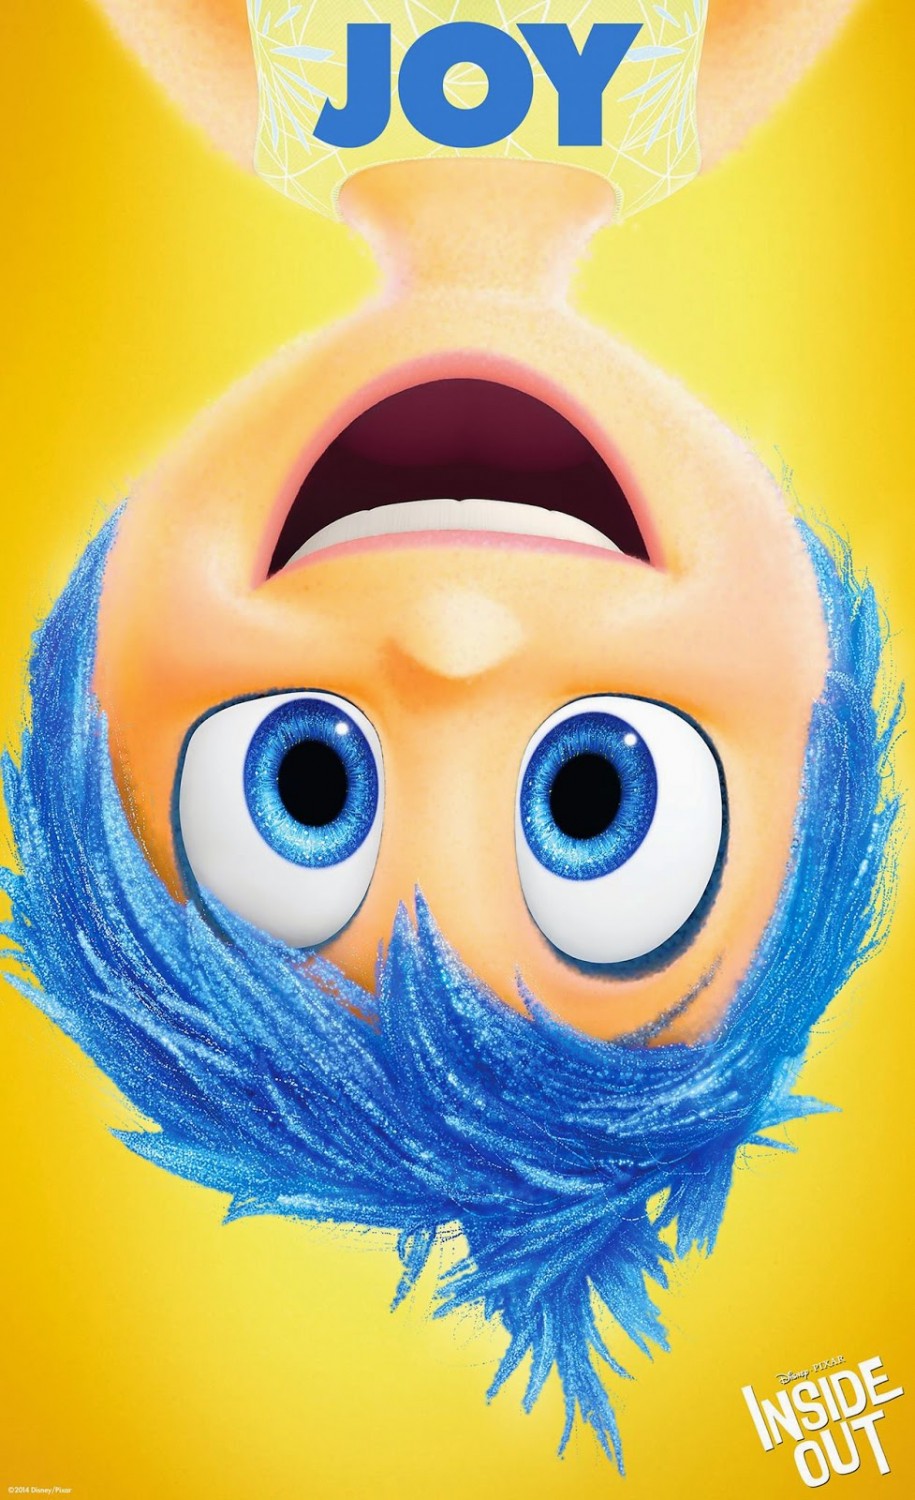 Extra Large Movie Poster Image for Inside Out (#5 of 27)